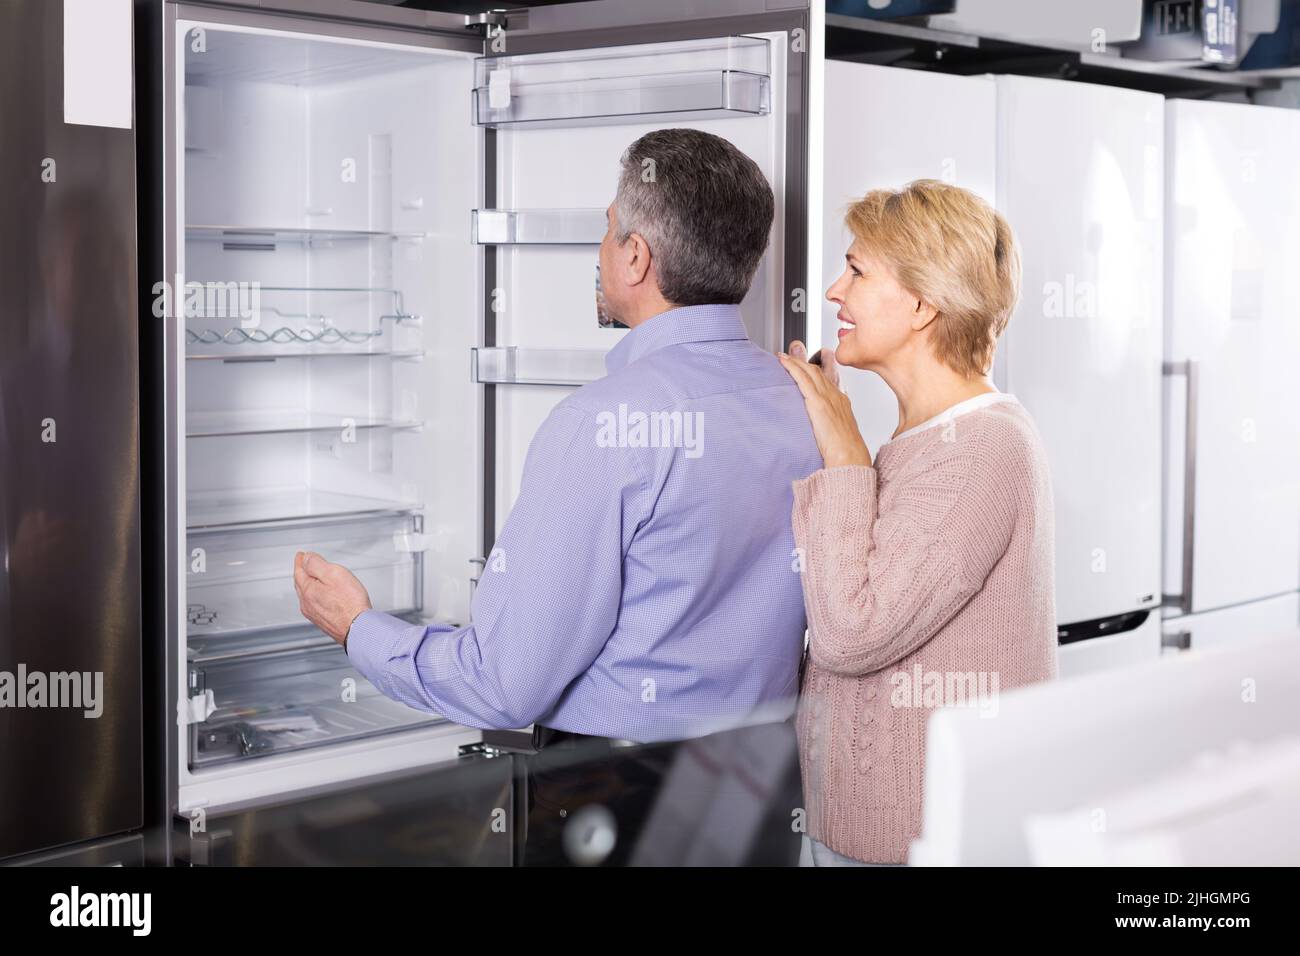 Mature woman with husband chooses refrigerator Stock Photo